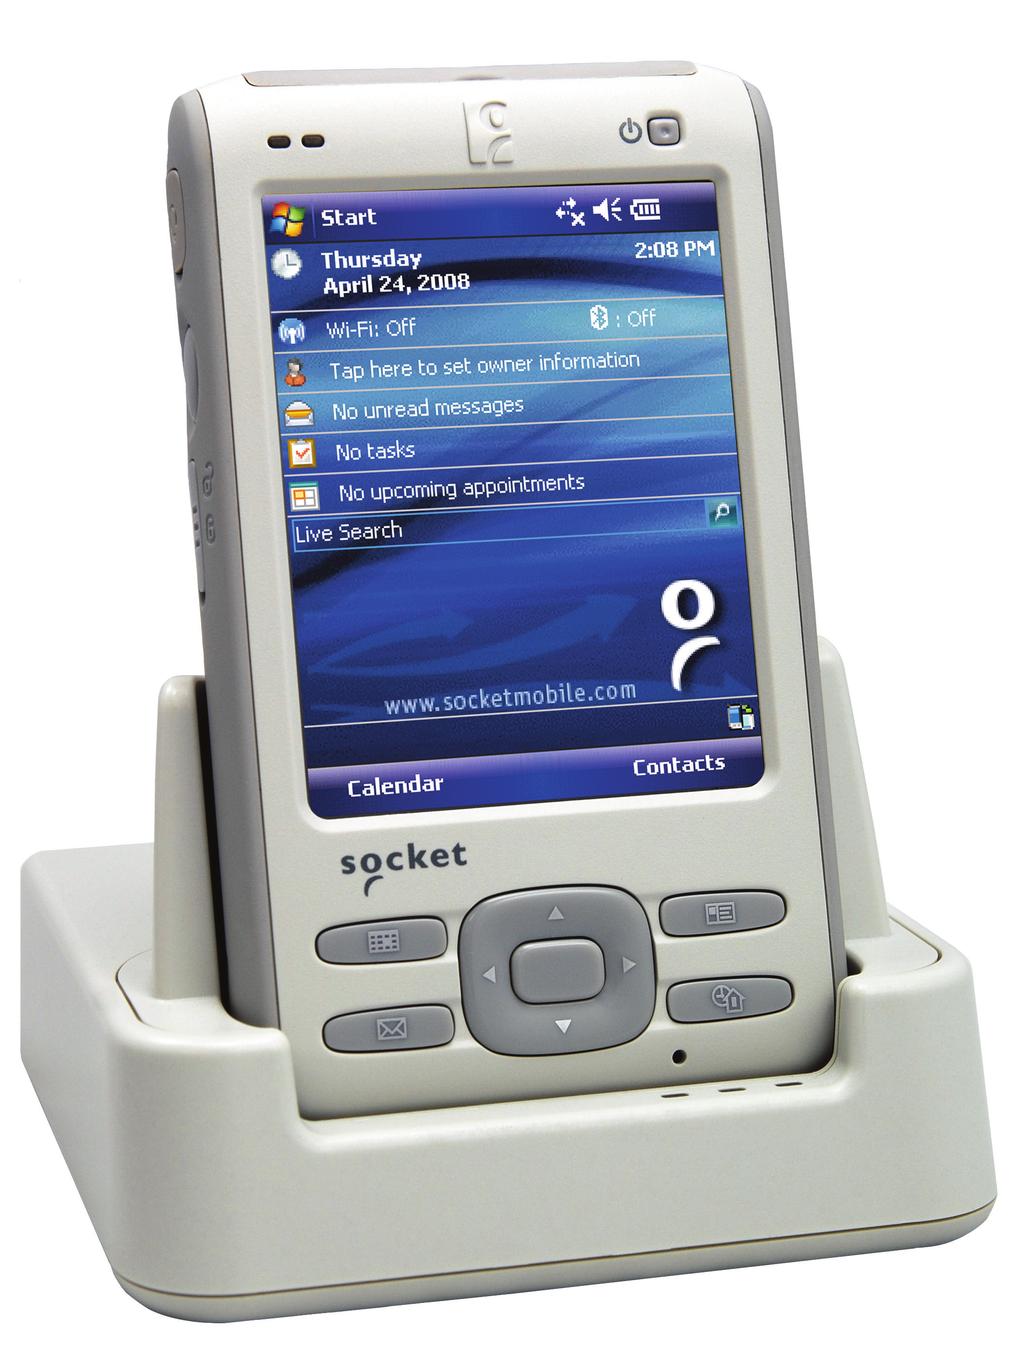 mobile Antimicrobial Lab Test Report The Socket SoMo 650Rx handheld computer incorporates antimicrobial materials that provide an extra layer of protection to the device against the spread and